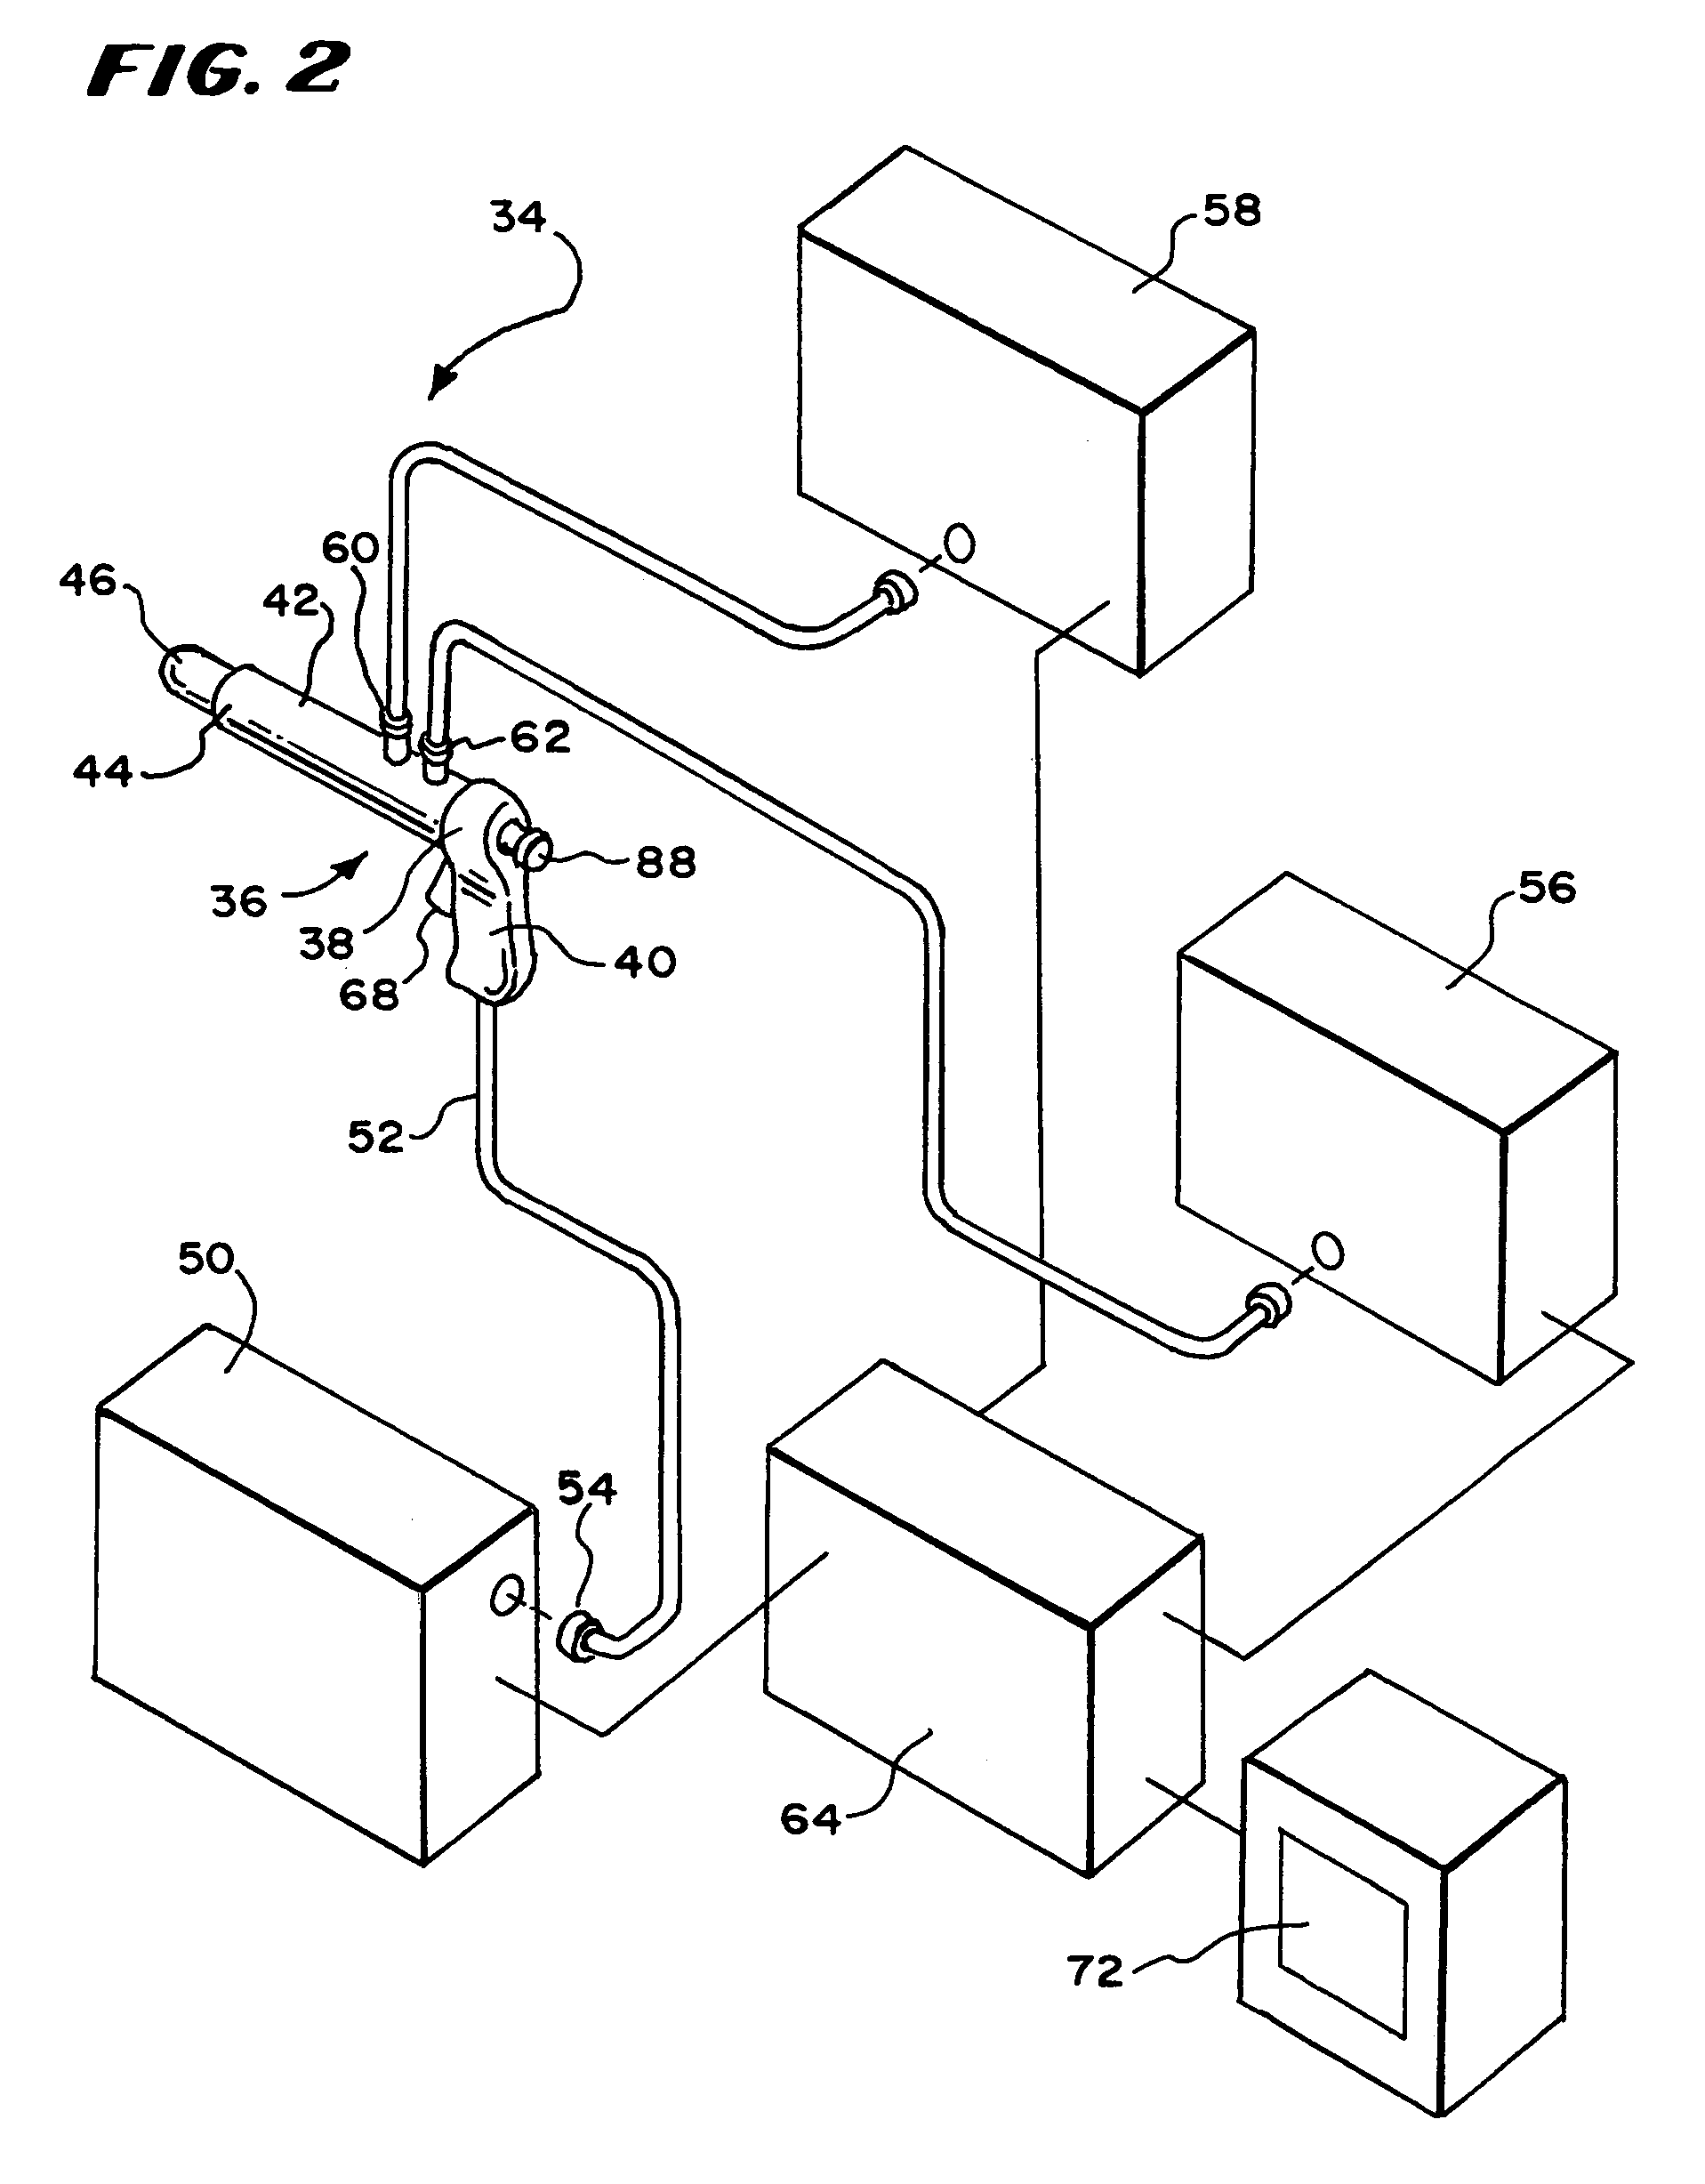 Systems and methods for treating dysfunctions in the intestines and rectum